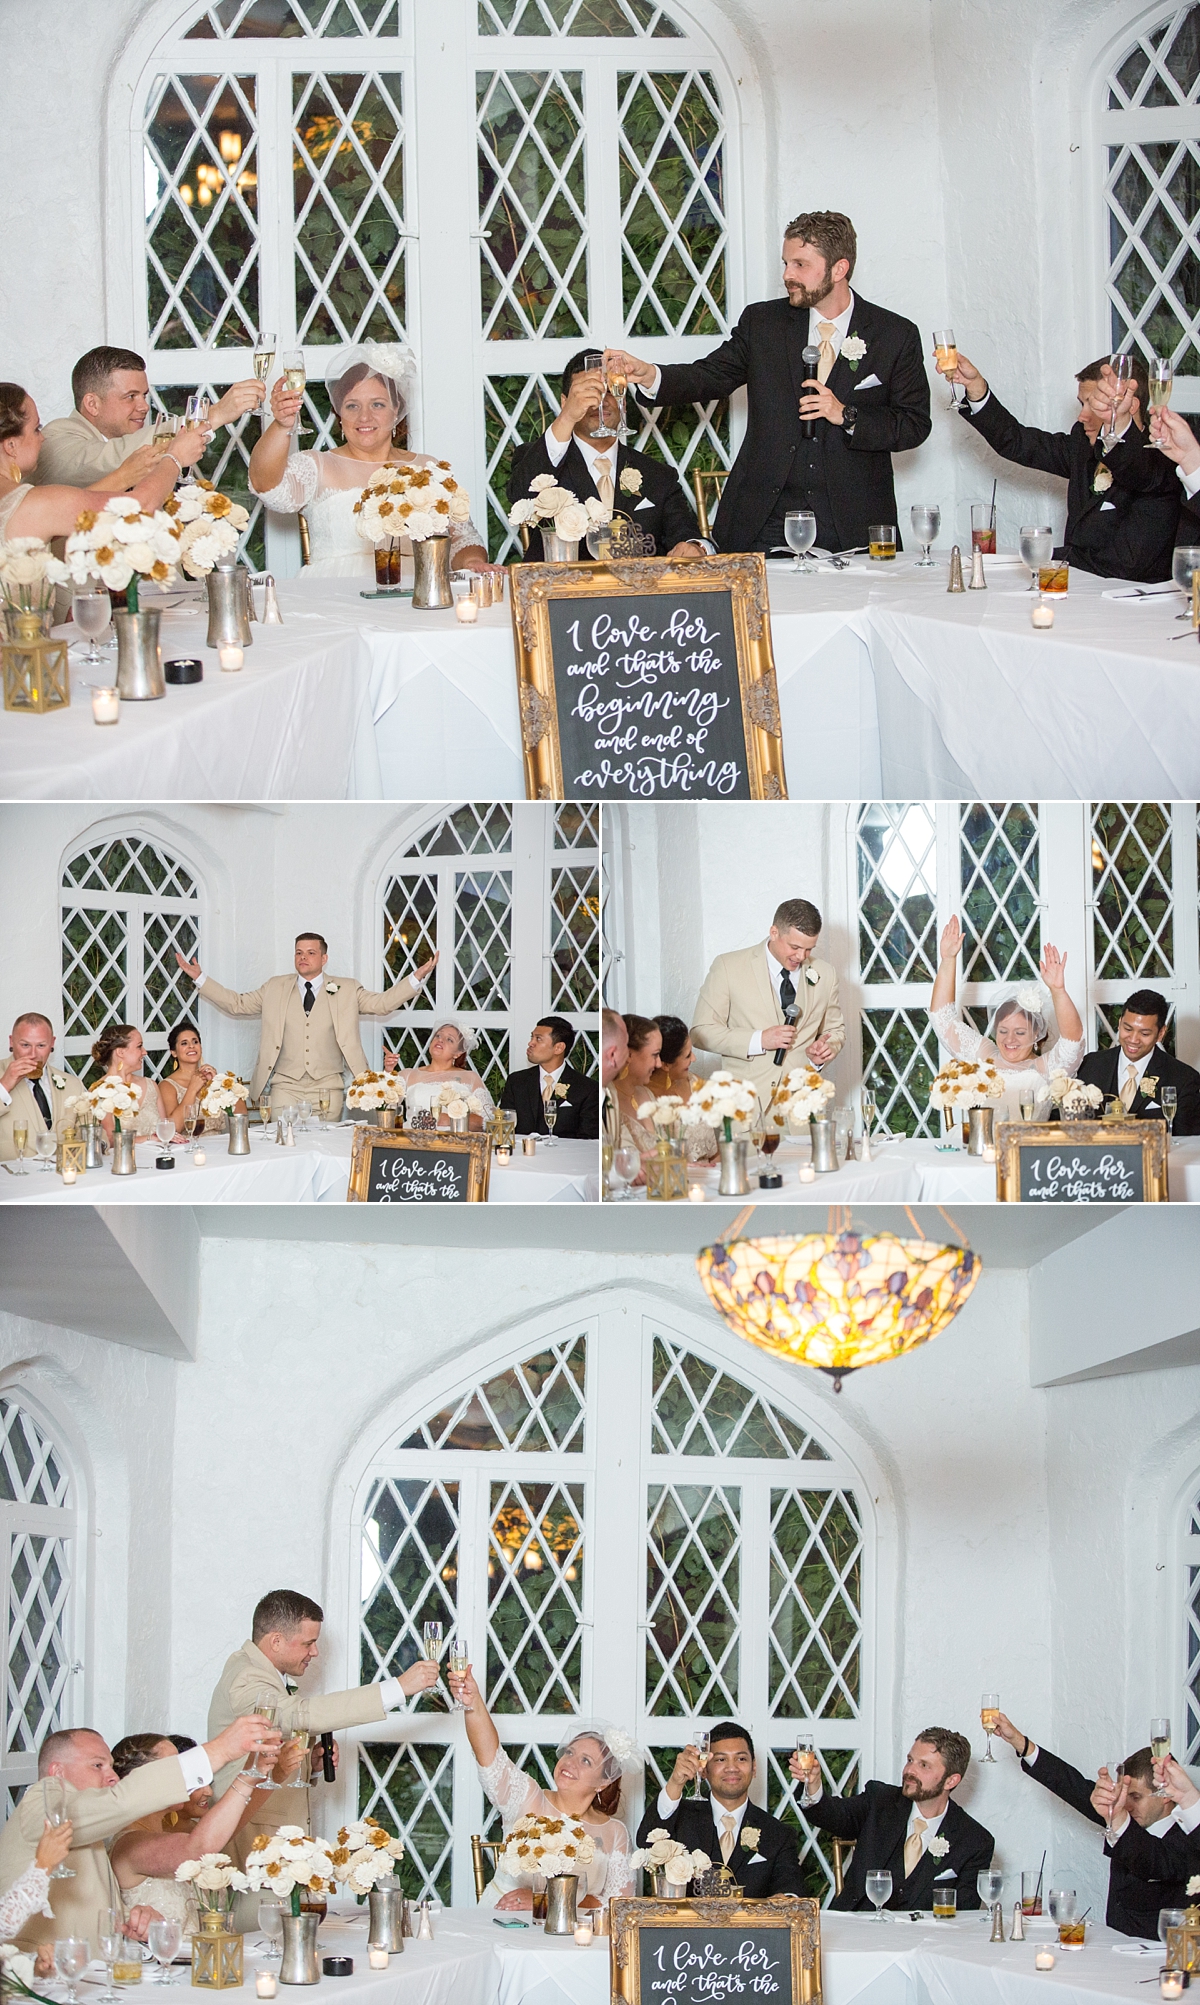 beardslee castle, little falls, ny, sarah heppell photography, best man toasts newlyweds, man as maid of honor, wedding toasts